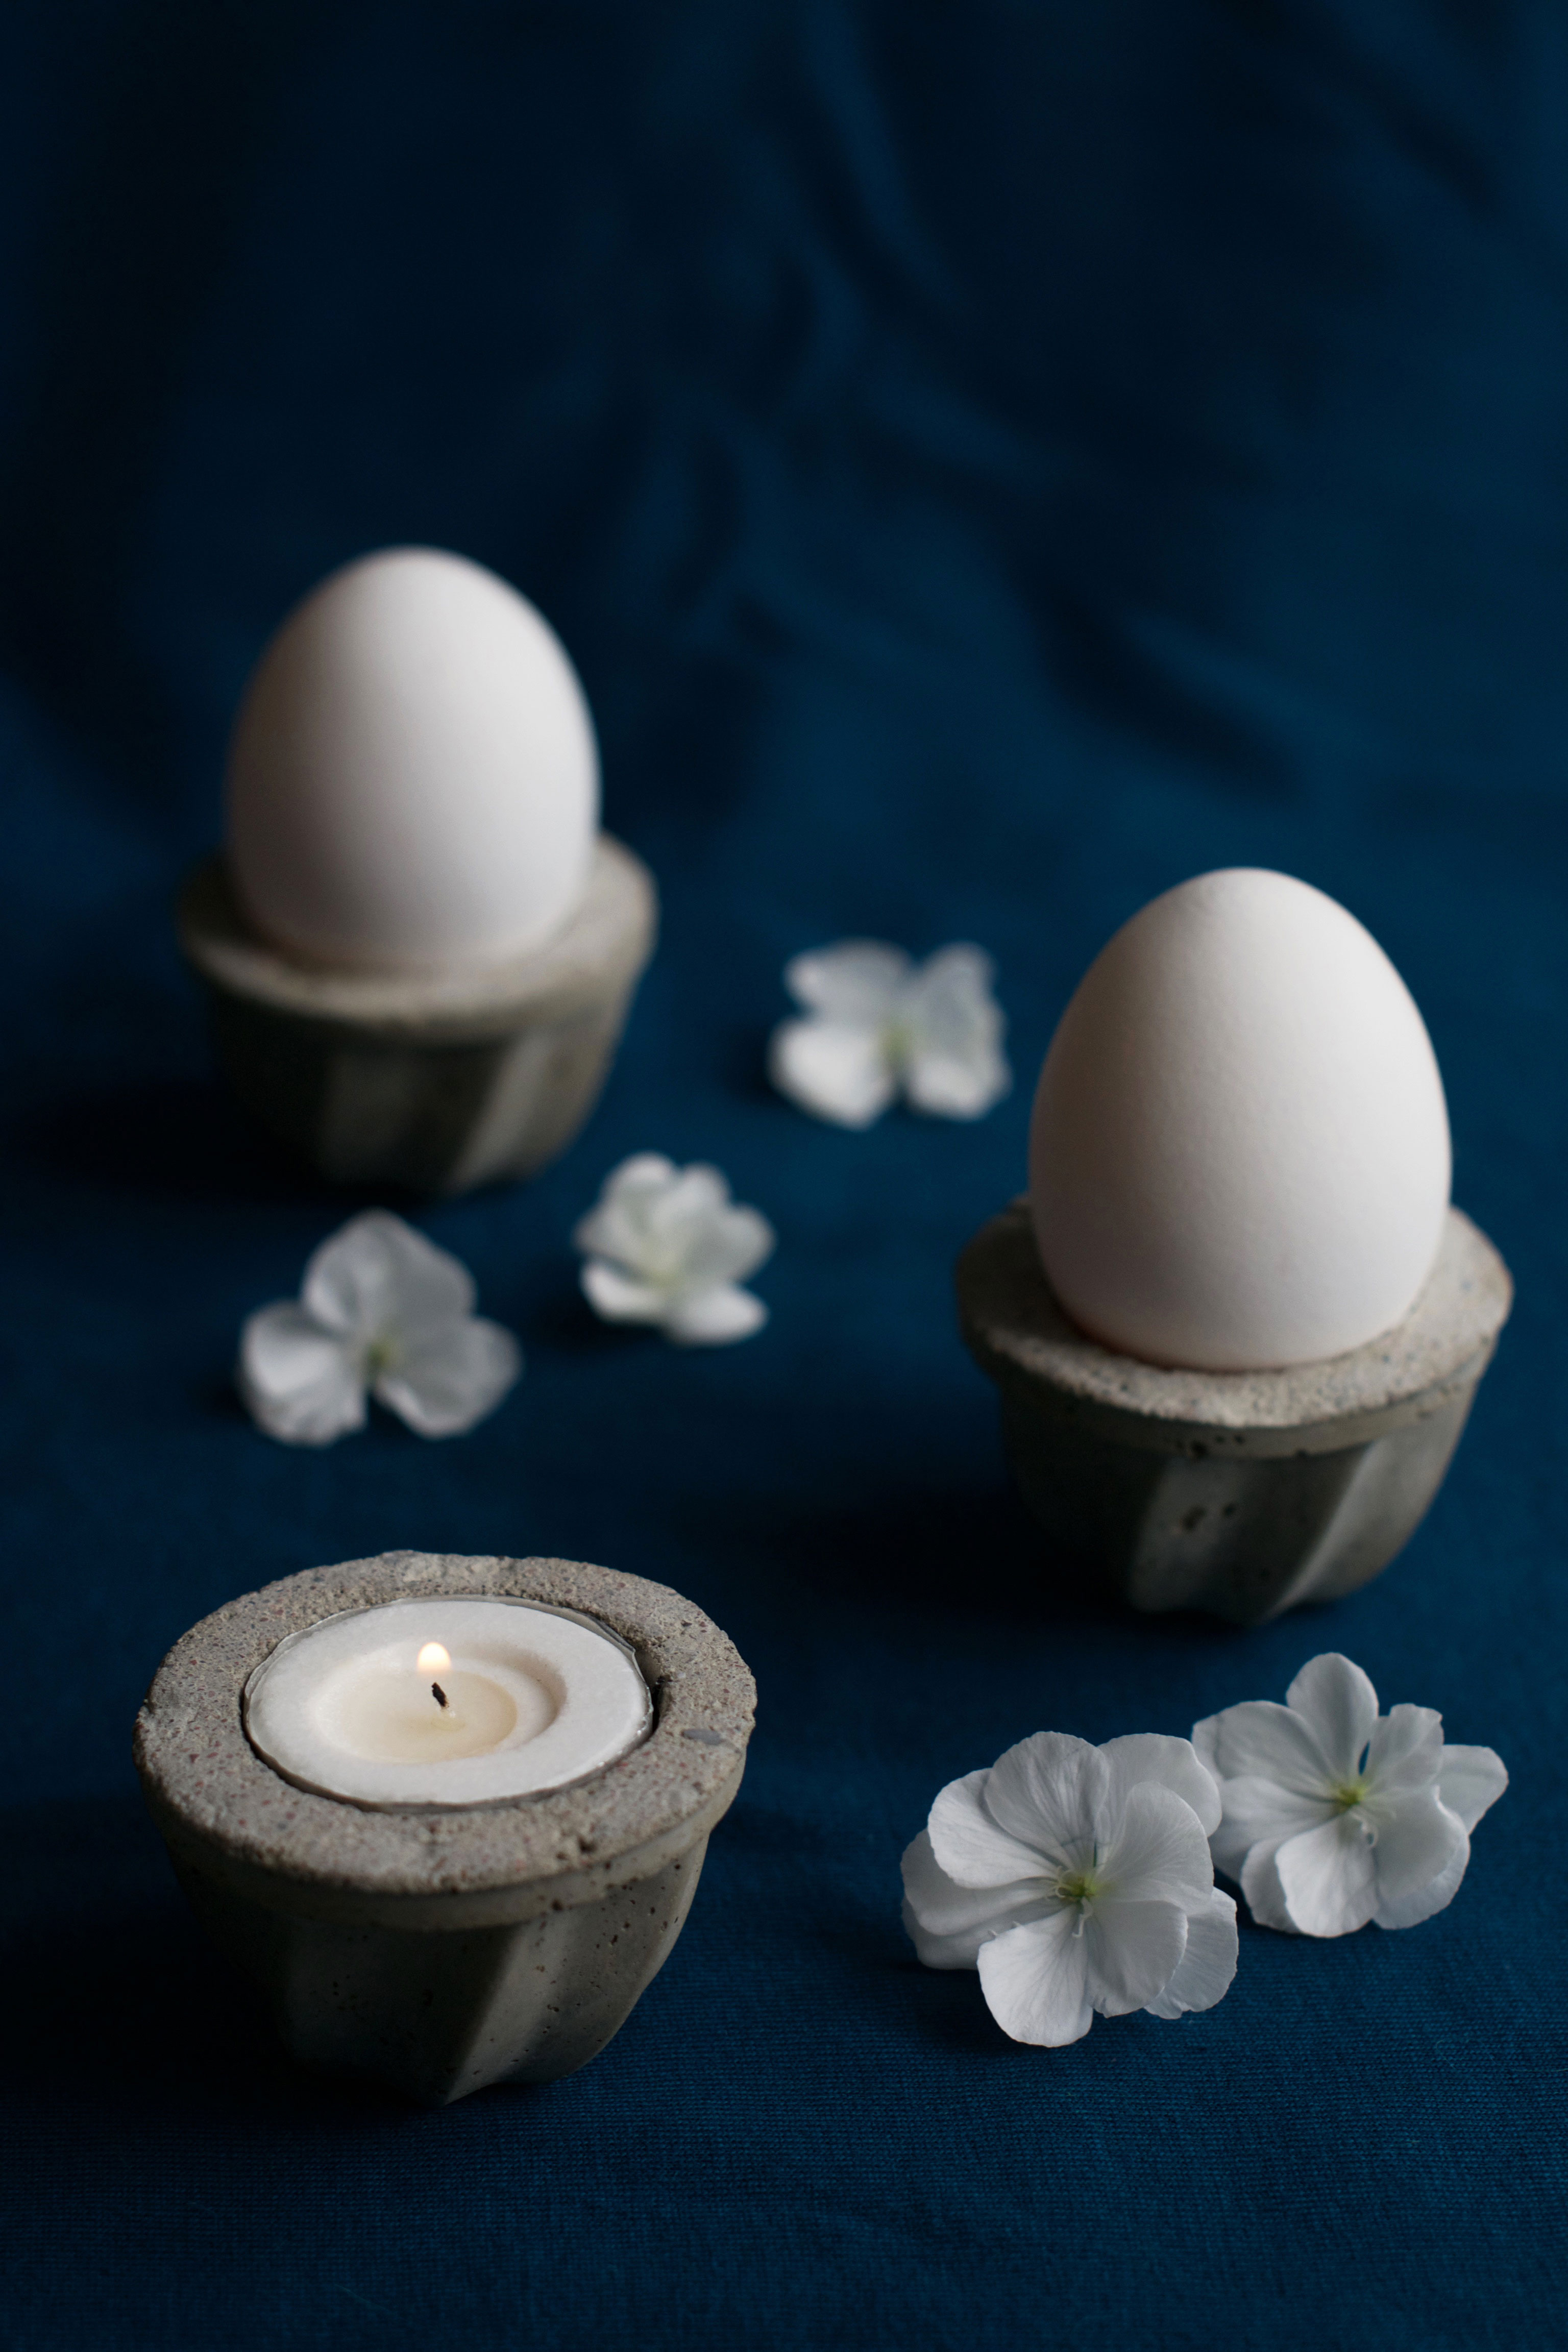 DIY concrete votives and egg cups in one